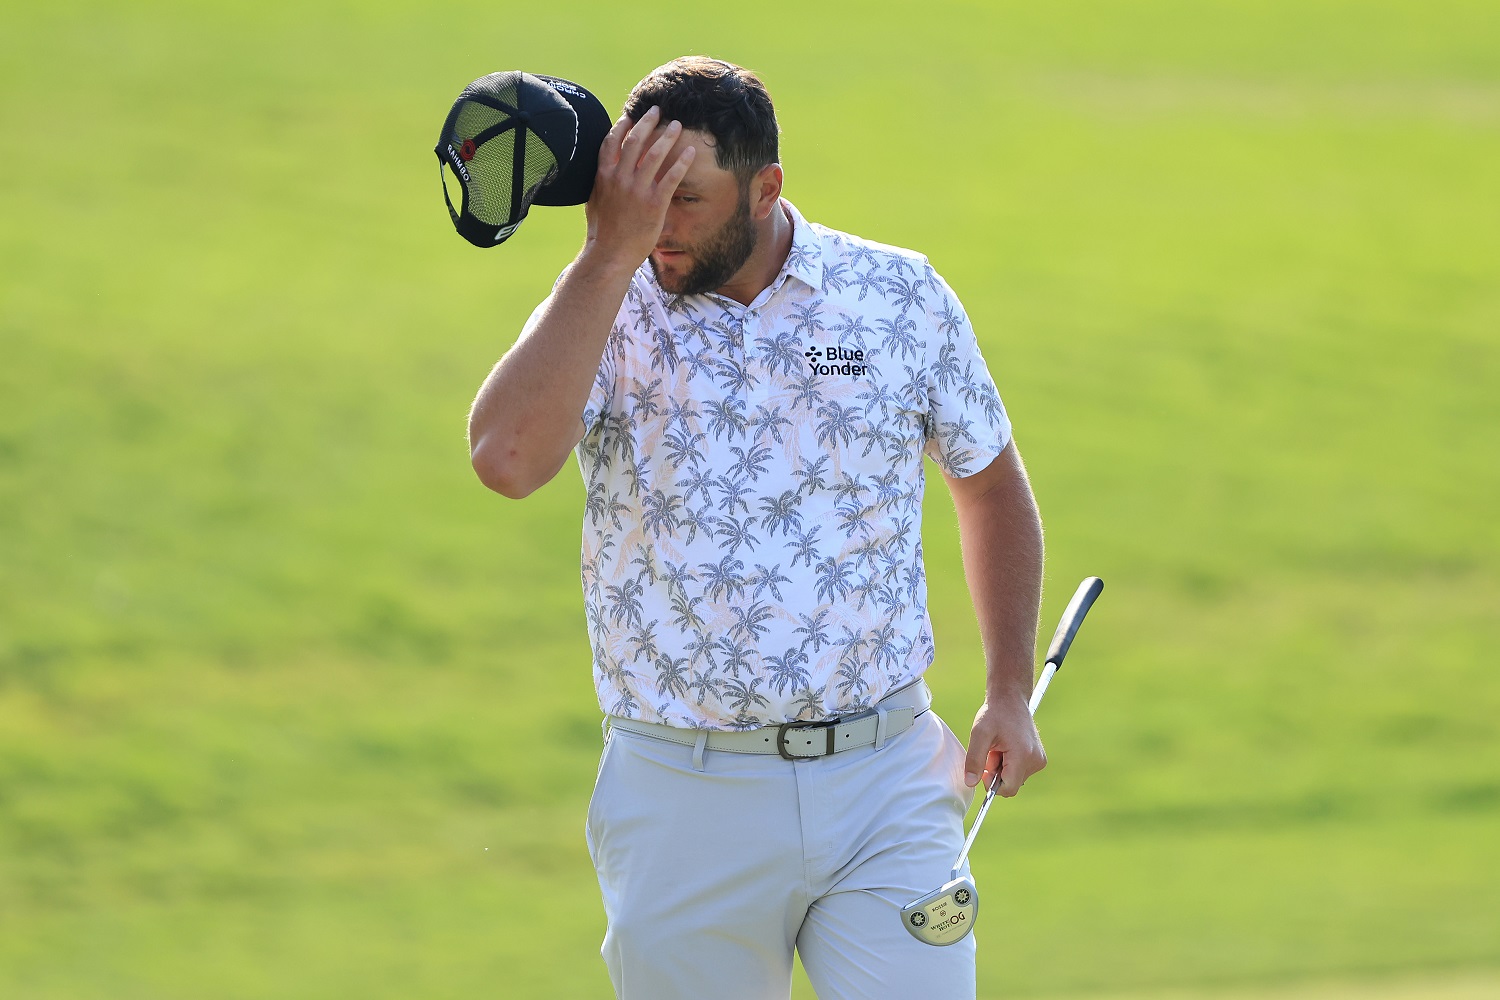 Jon Rahm reacts as he walks off the 18th green after completing his third round of the Memorial Tournament at Muirfield Village Golf Club in Dublin, Ohio. | Photo by Sam Greenwood/Getty Images